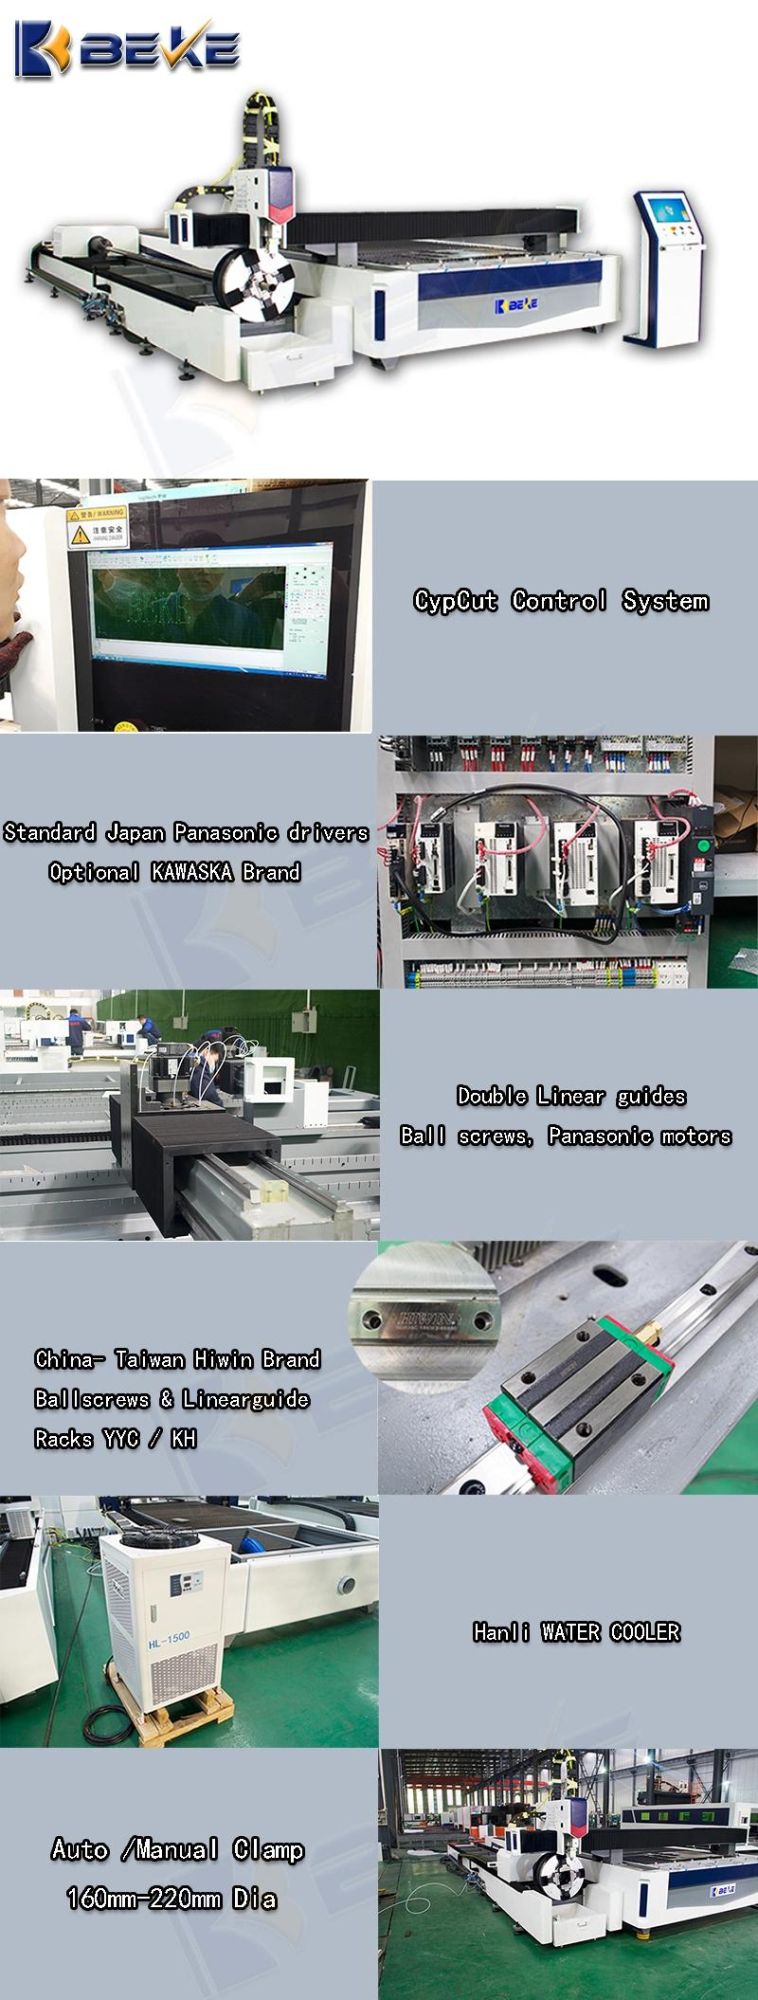 Tube and Plate CNC Carbon Steel Fiber Laser Cutting Machine